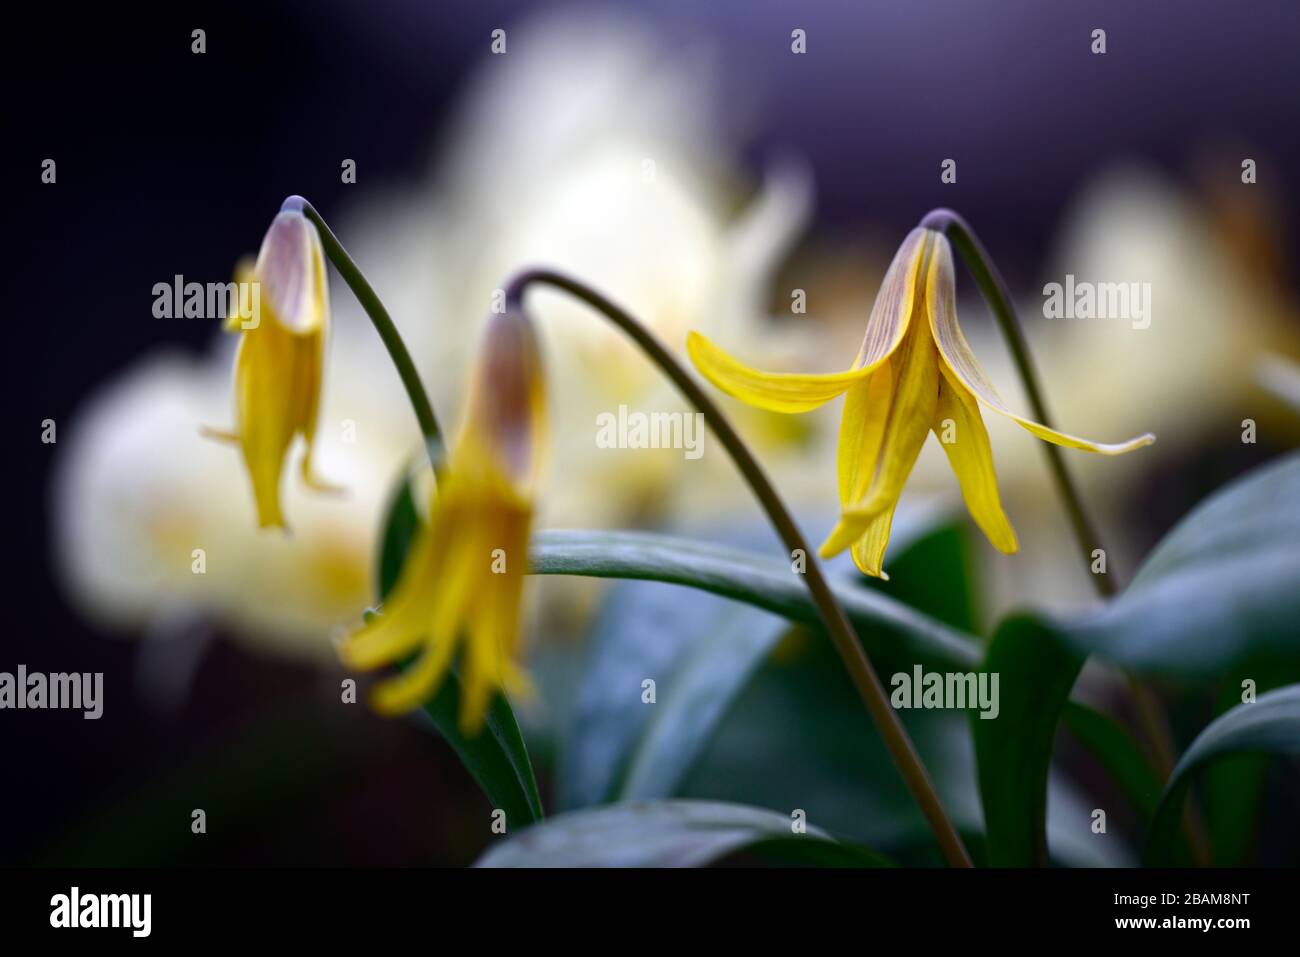 Erythronium umbilicatum,dimpled trout lily,spring,flowers,flower,flowering,yellow flowers,spring,flowers,flower,flowering,mottled foliage,RM Floral Stock Photo